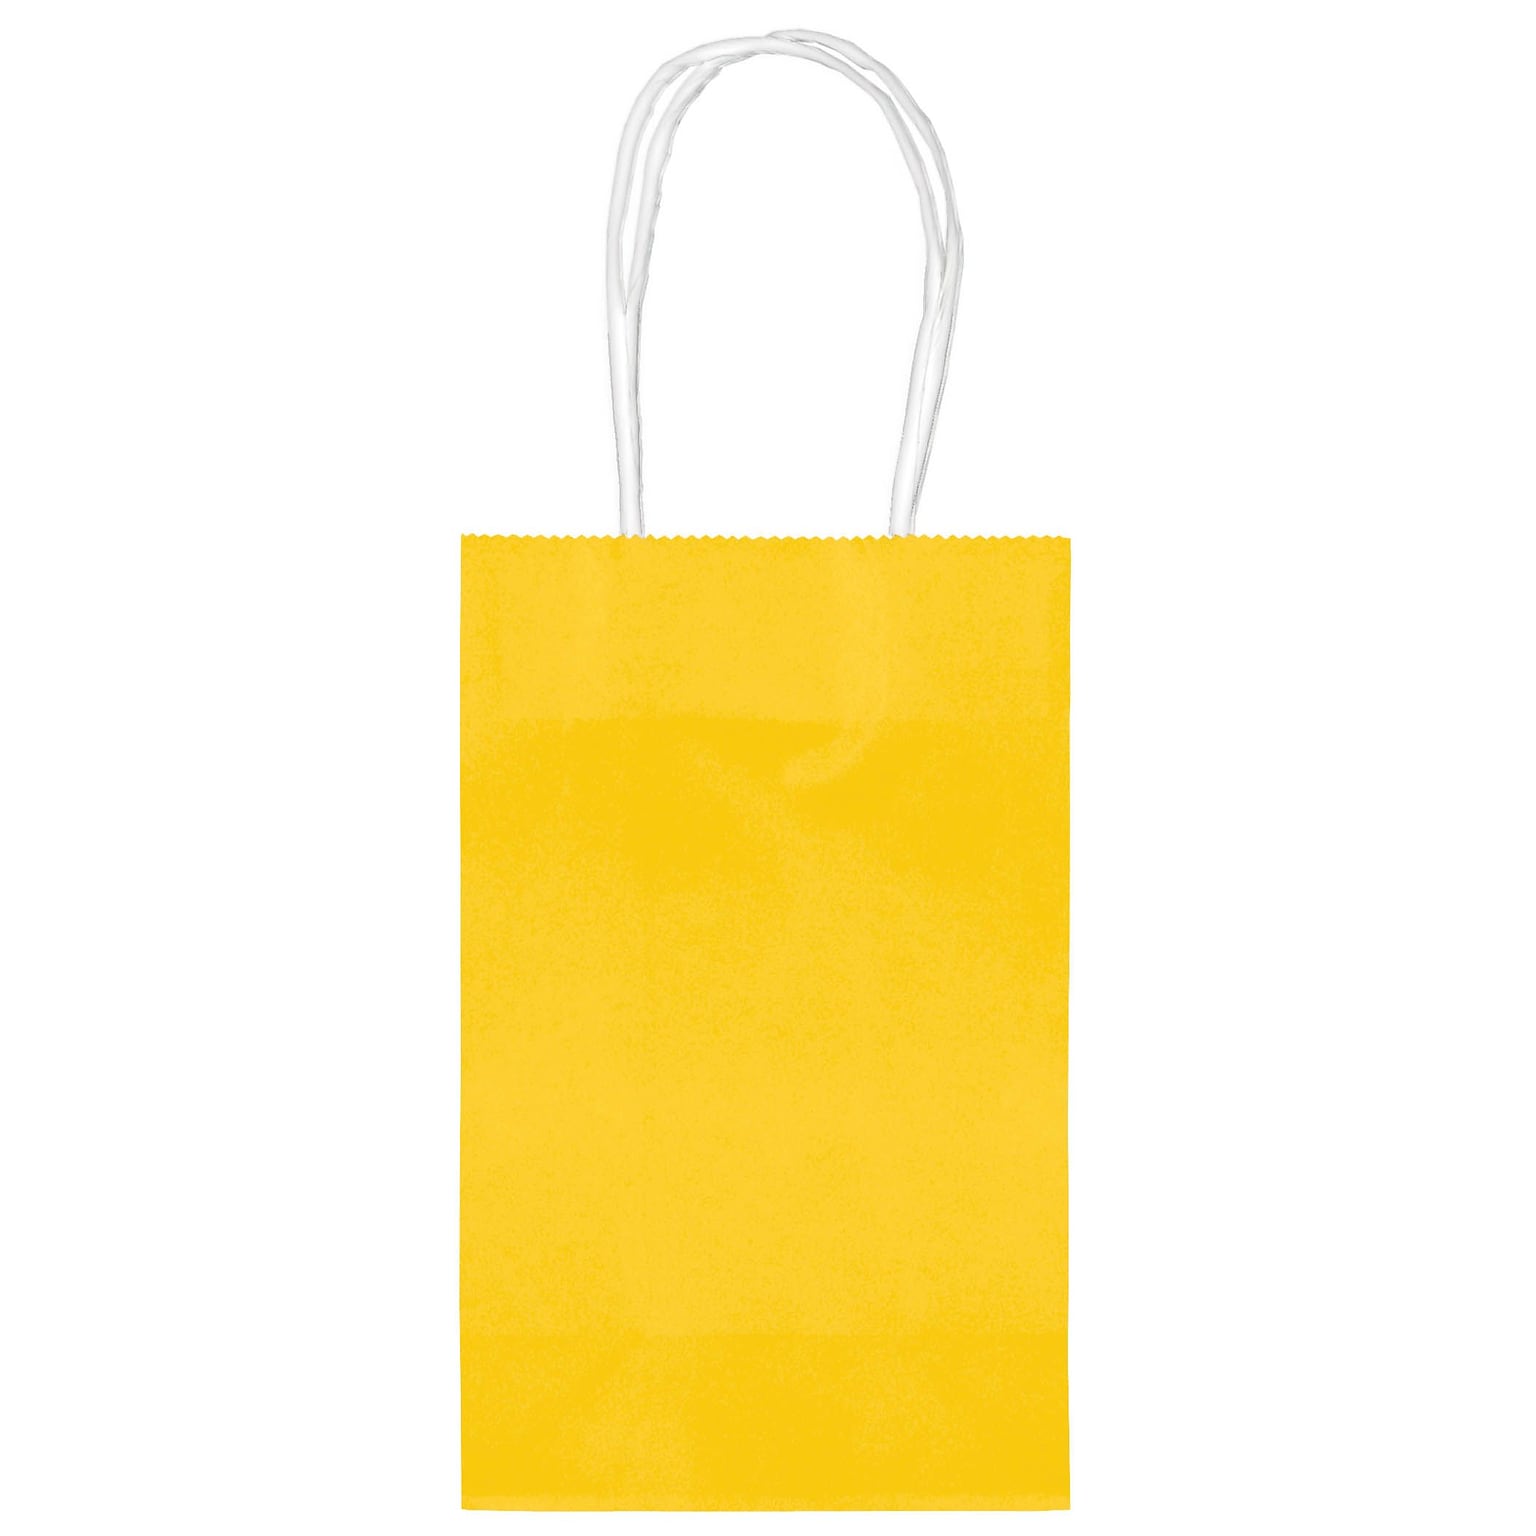 Amscan Cub Bags Value Pack, 4/Pack, Sunshine Yellow (162500.09)